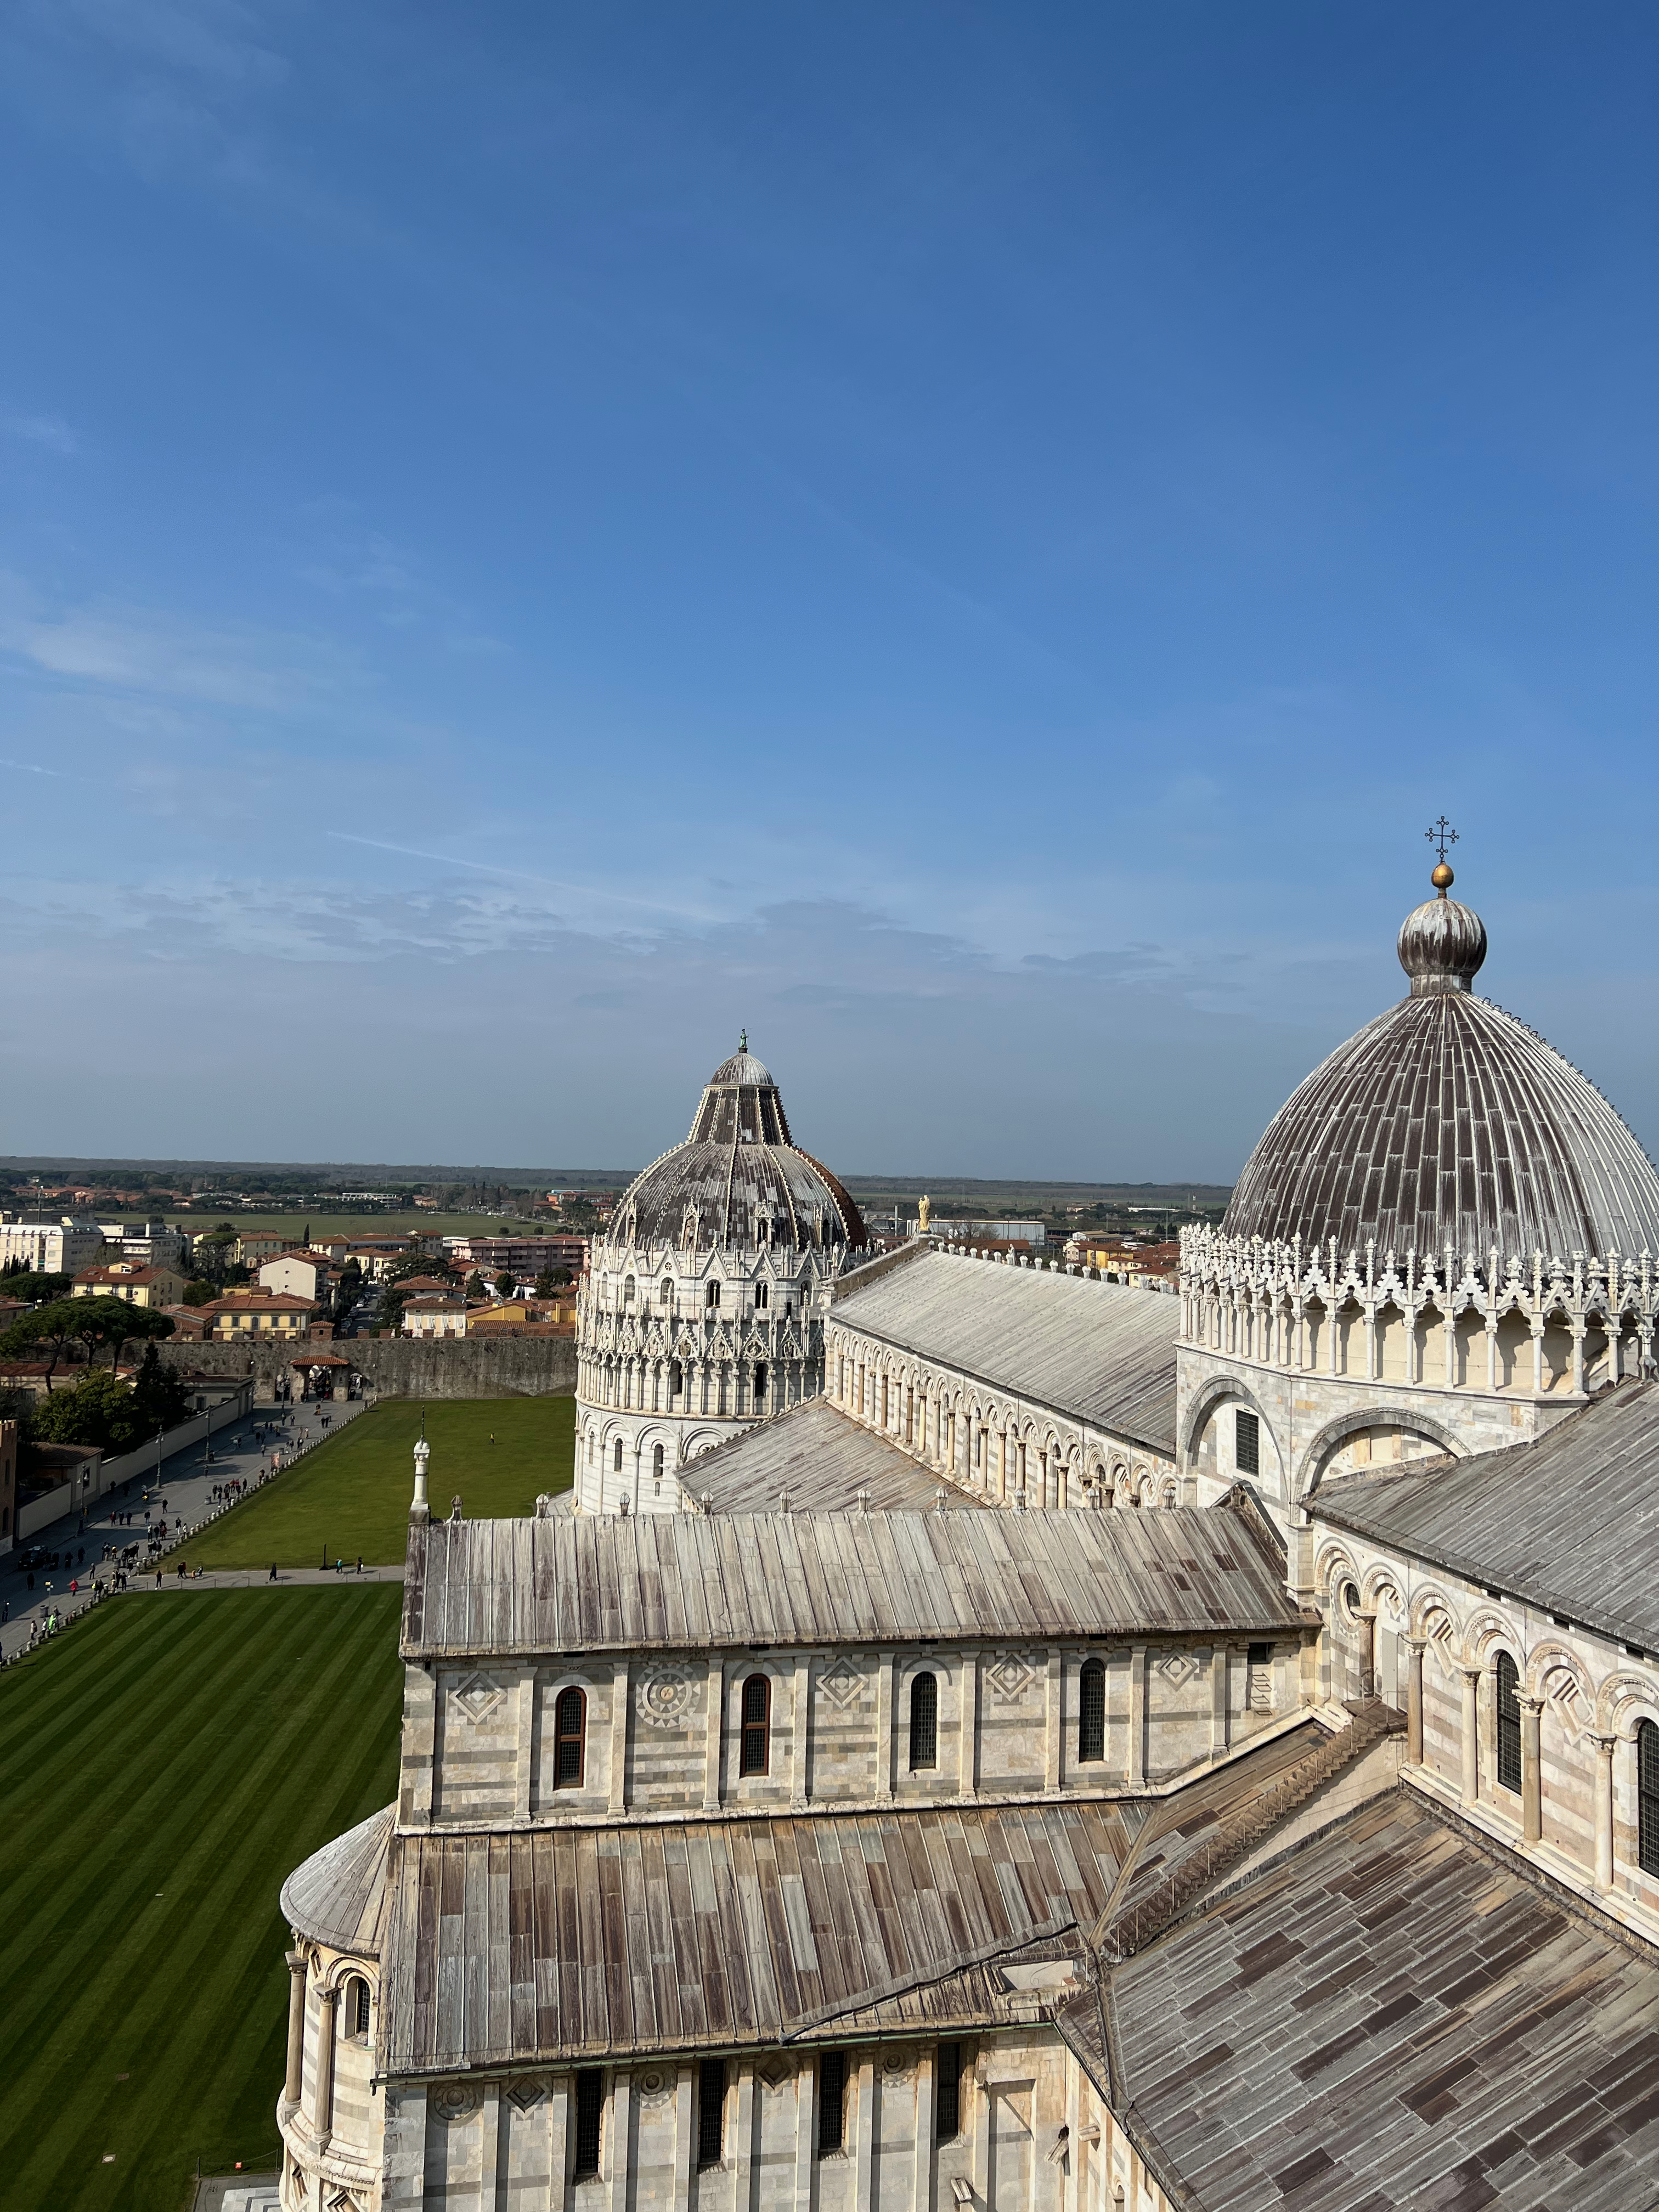 View from the Leaning Tower of Pisa to the Cattedrale di Pisa